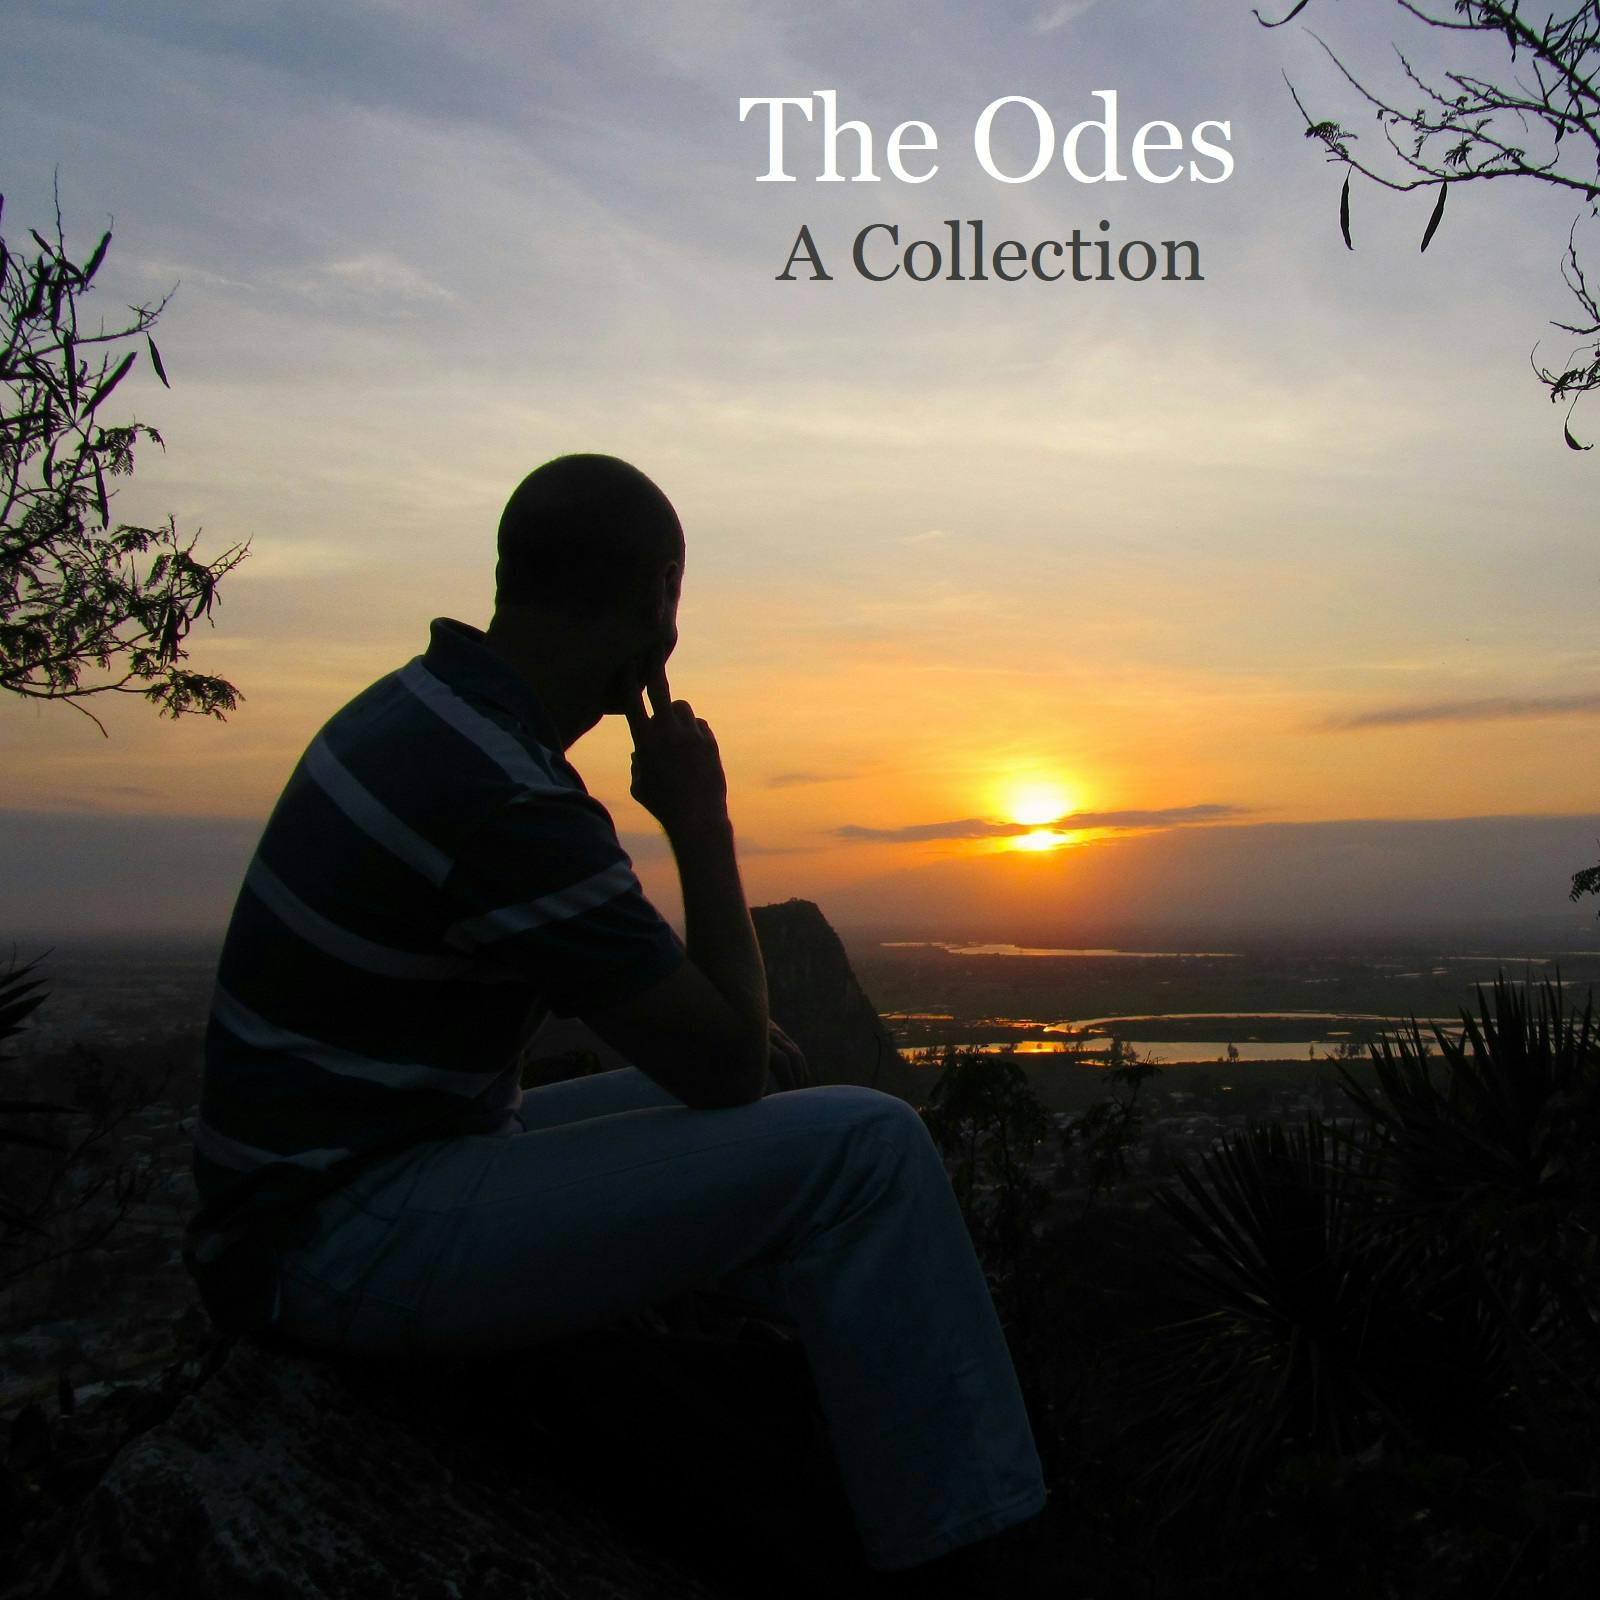 The Odes: A Collection